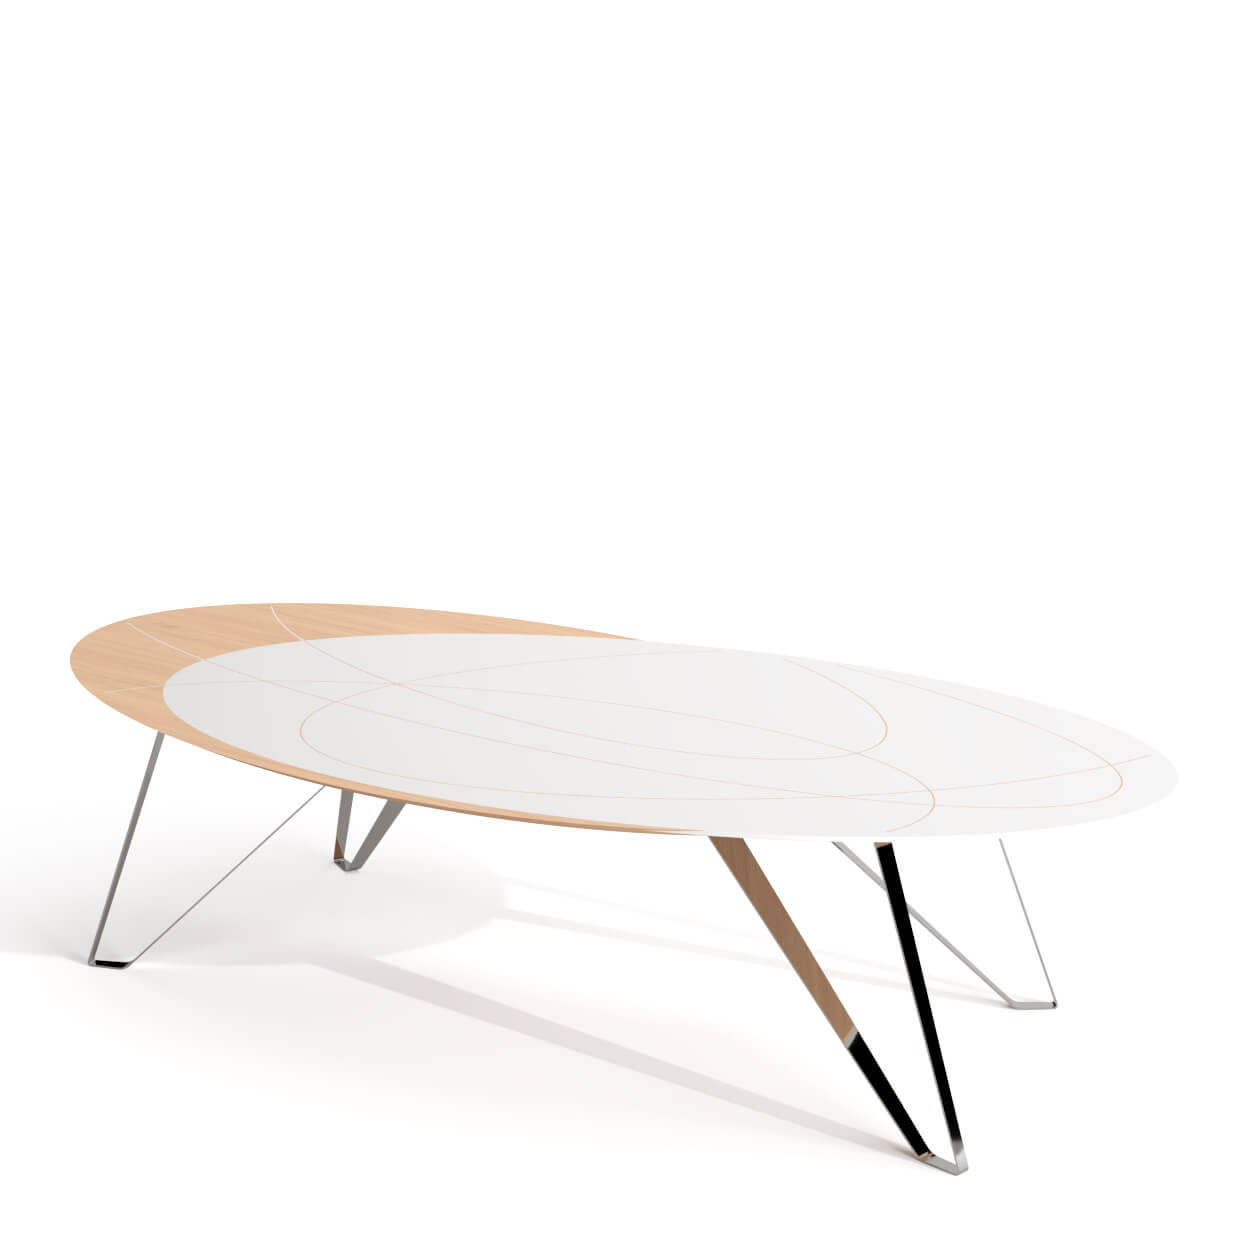 Modern Oval-Shaped Dining Table Oak Wood White Lacquer Polished Stainless Steel For Sale